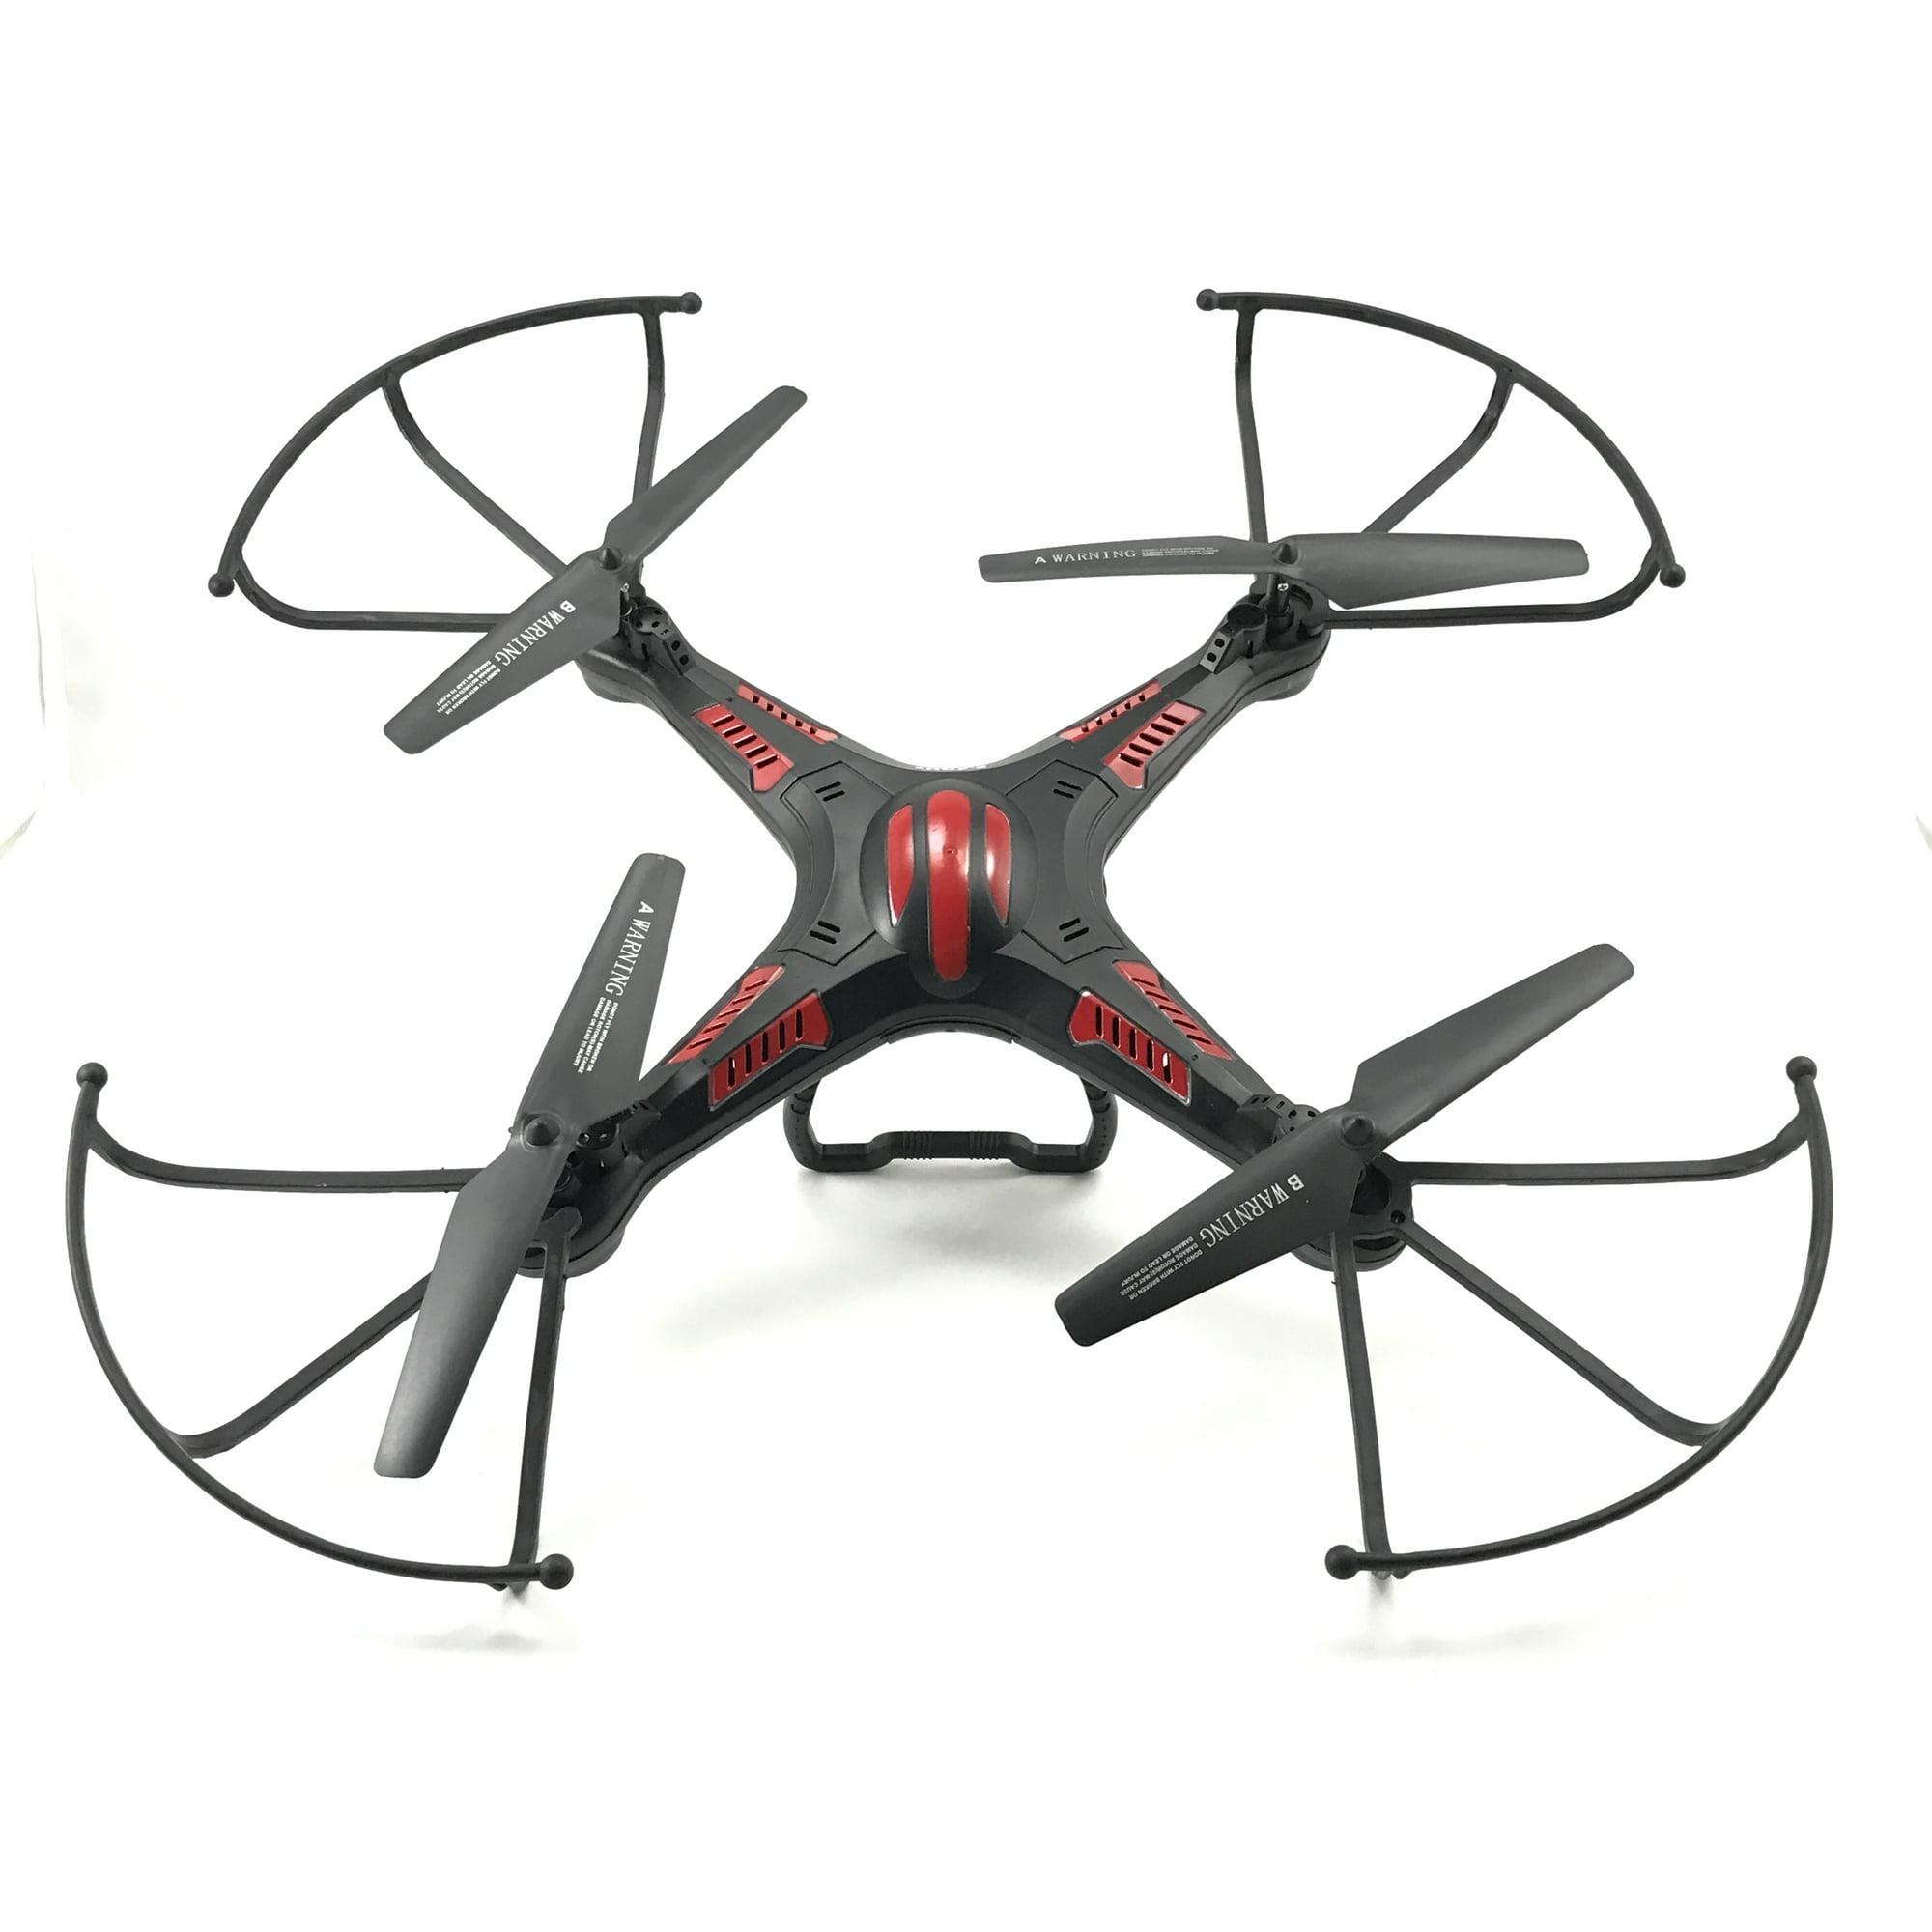 Kingco Quadcopter Vision Drone: Safety Features of the Kingco Quadcopter Vision Drone